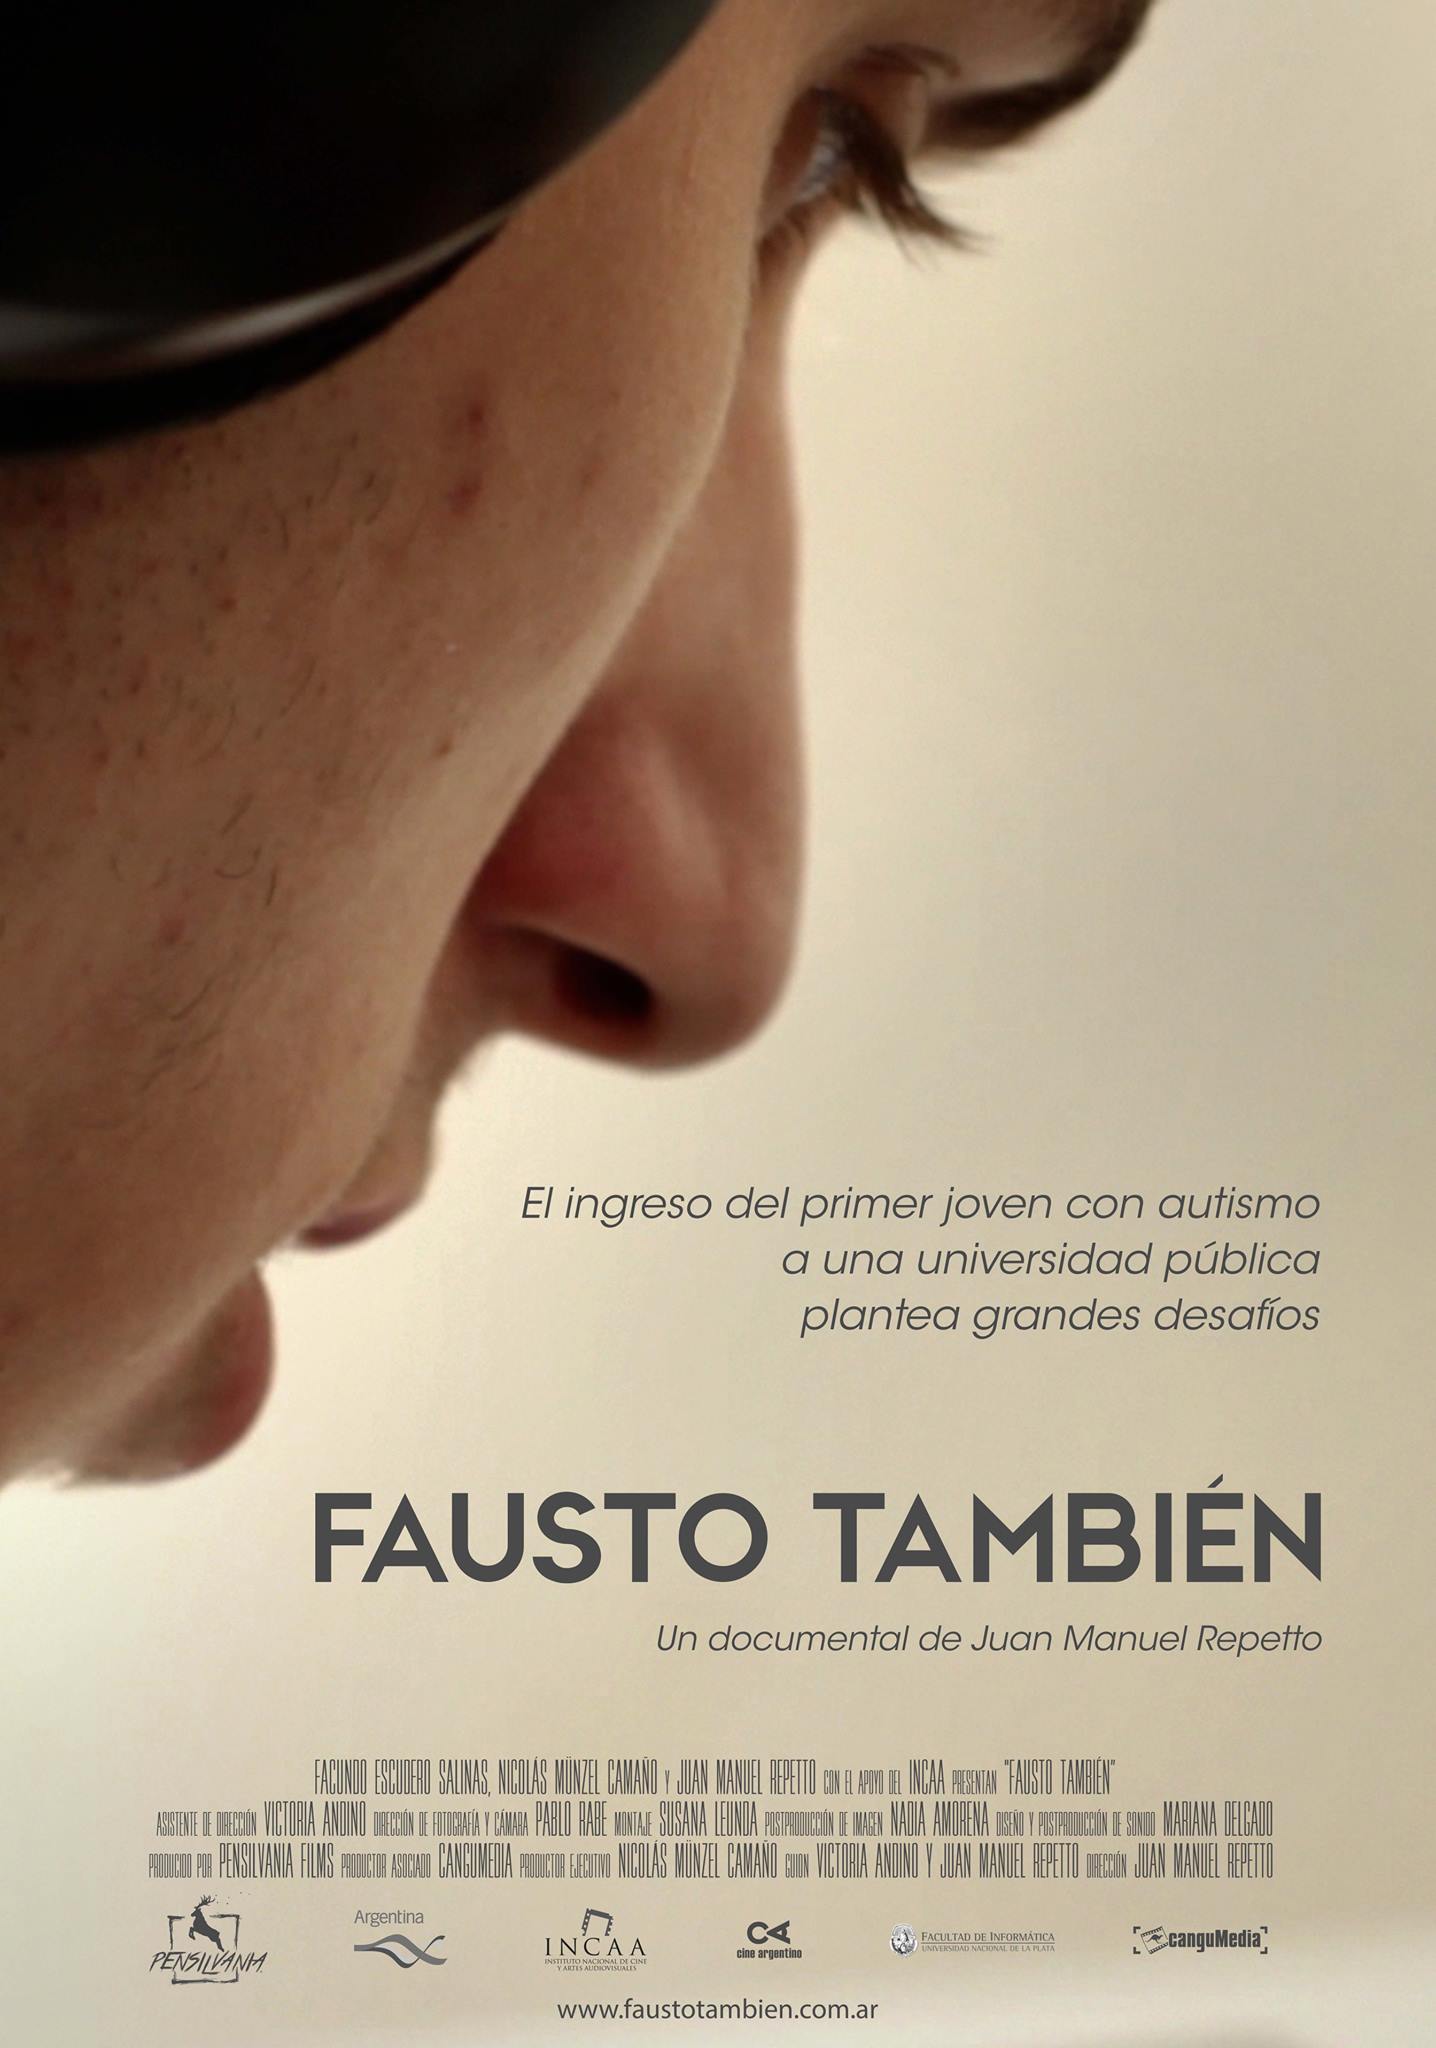 Fausto tambien psoter